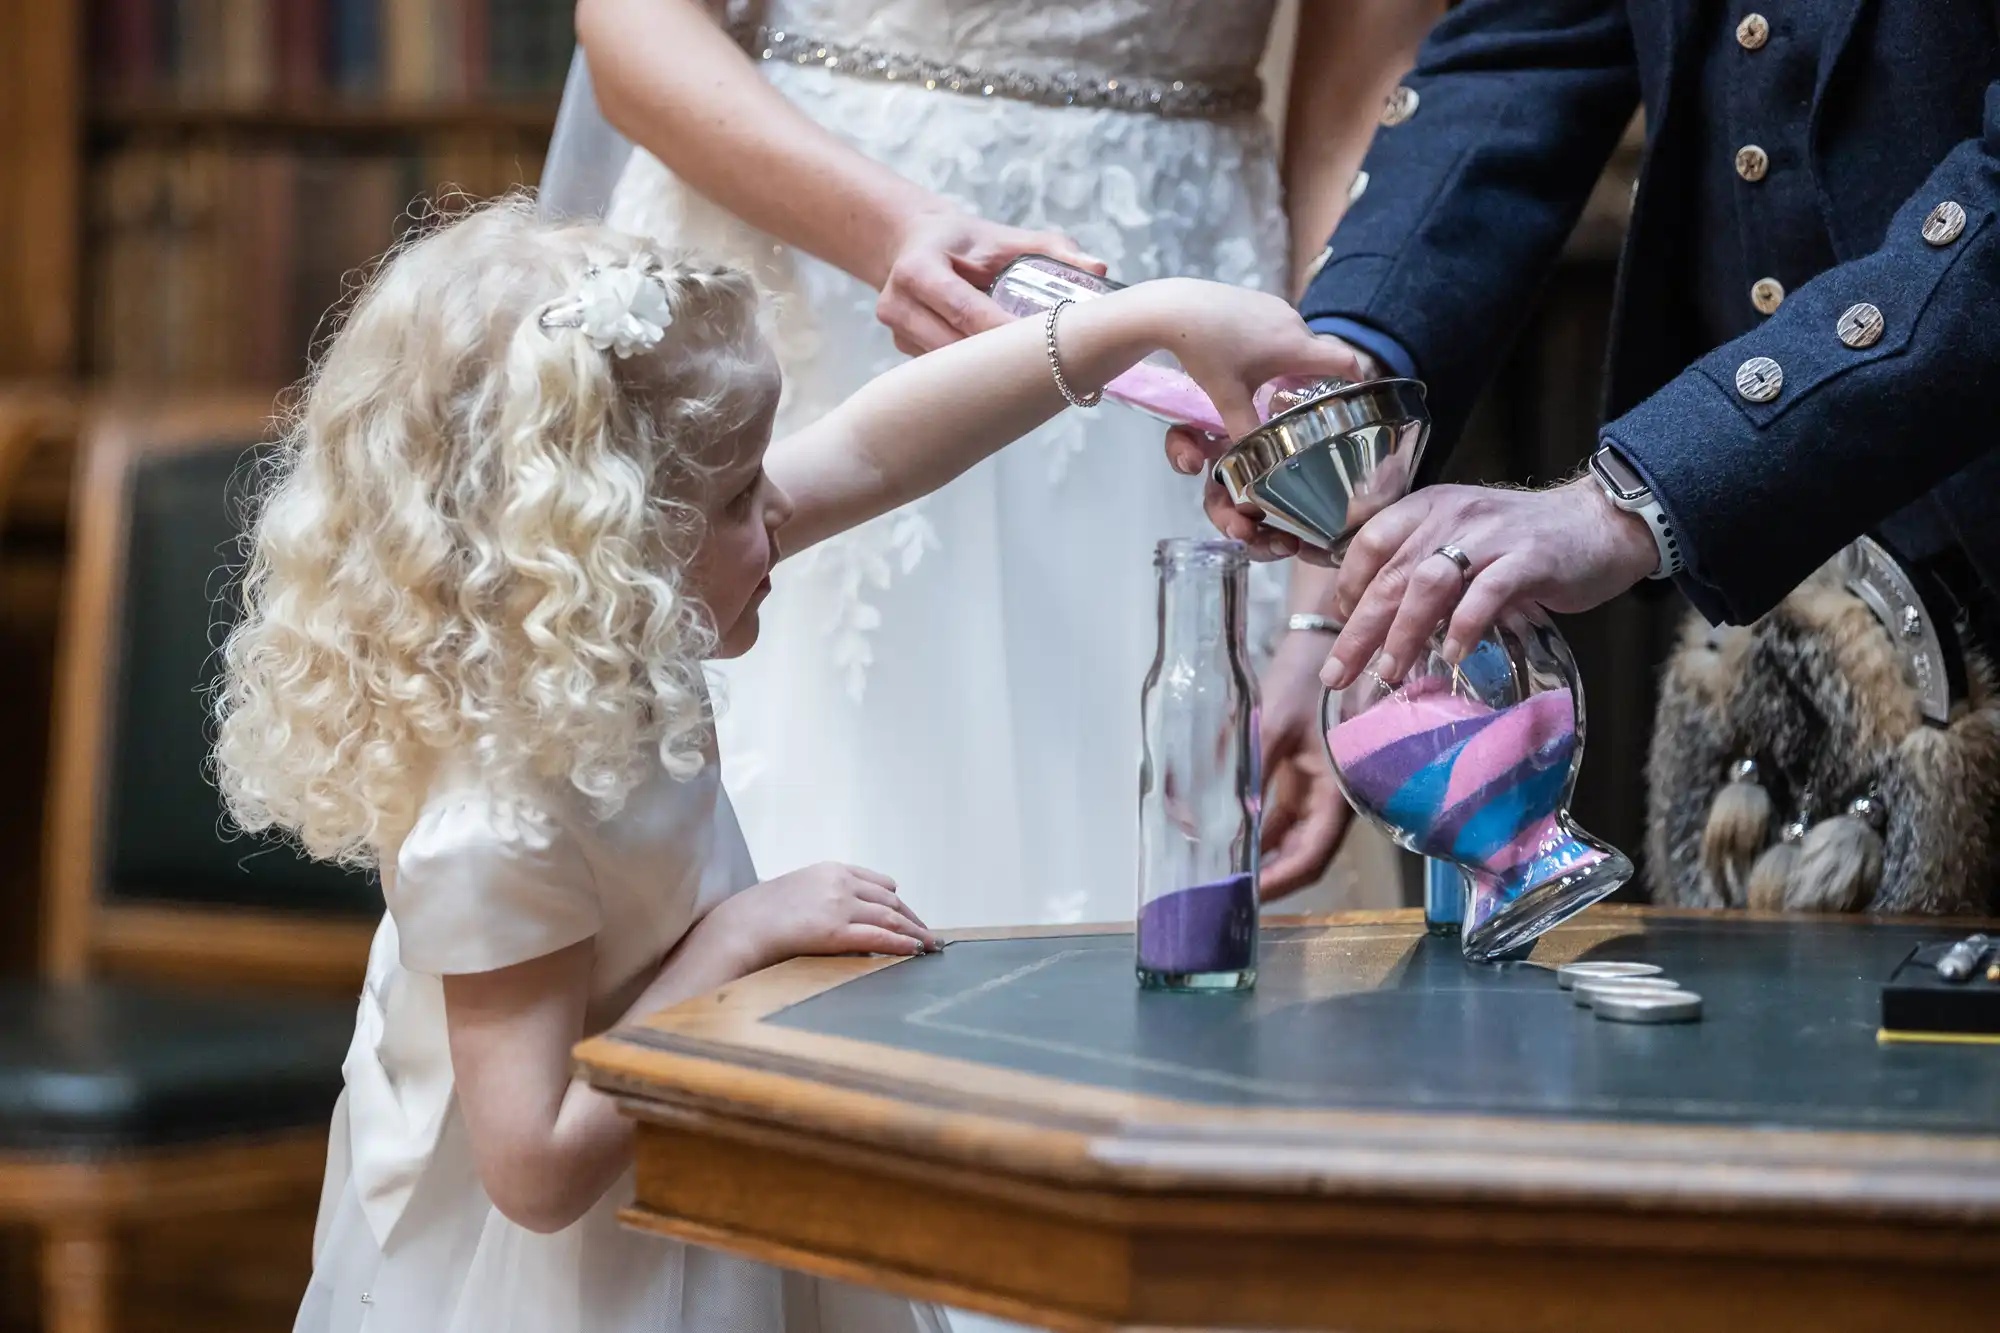 A young girl pours colored sand into a glass bottle, assisted by an adult, while a bride and groom stand nearby.